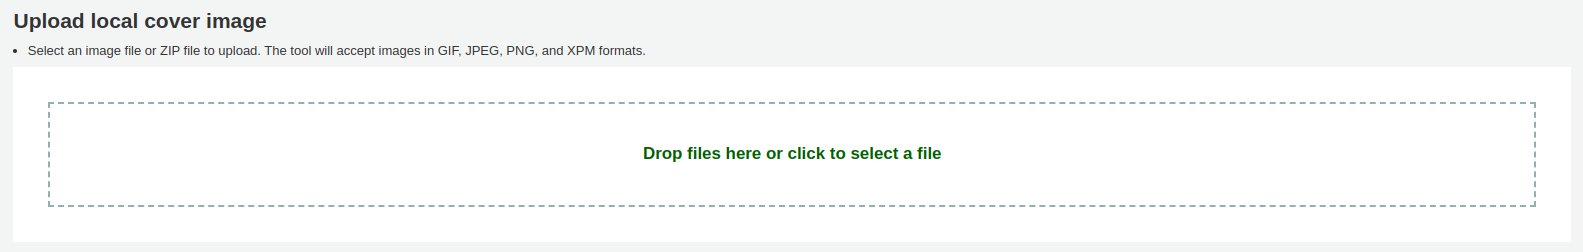 Upload cover image tool page